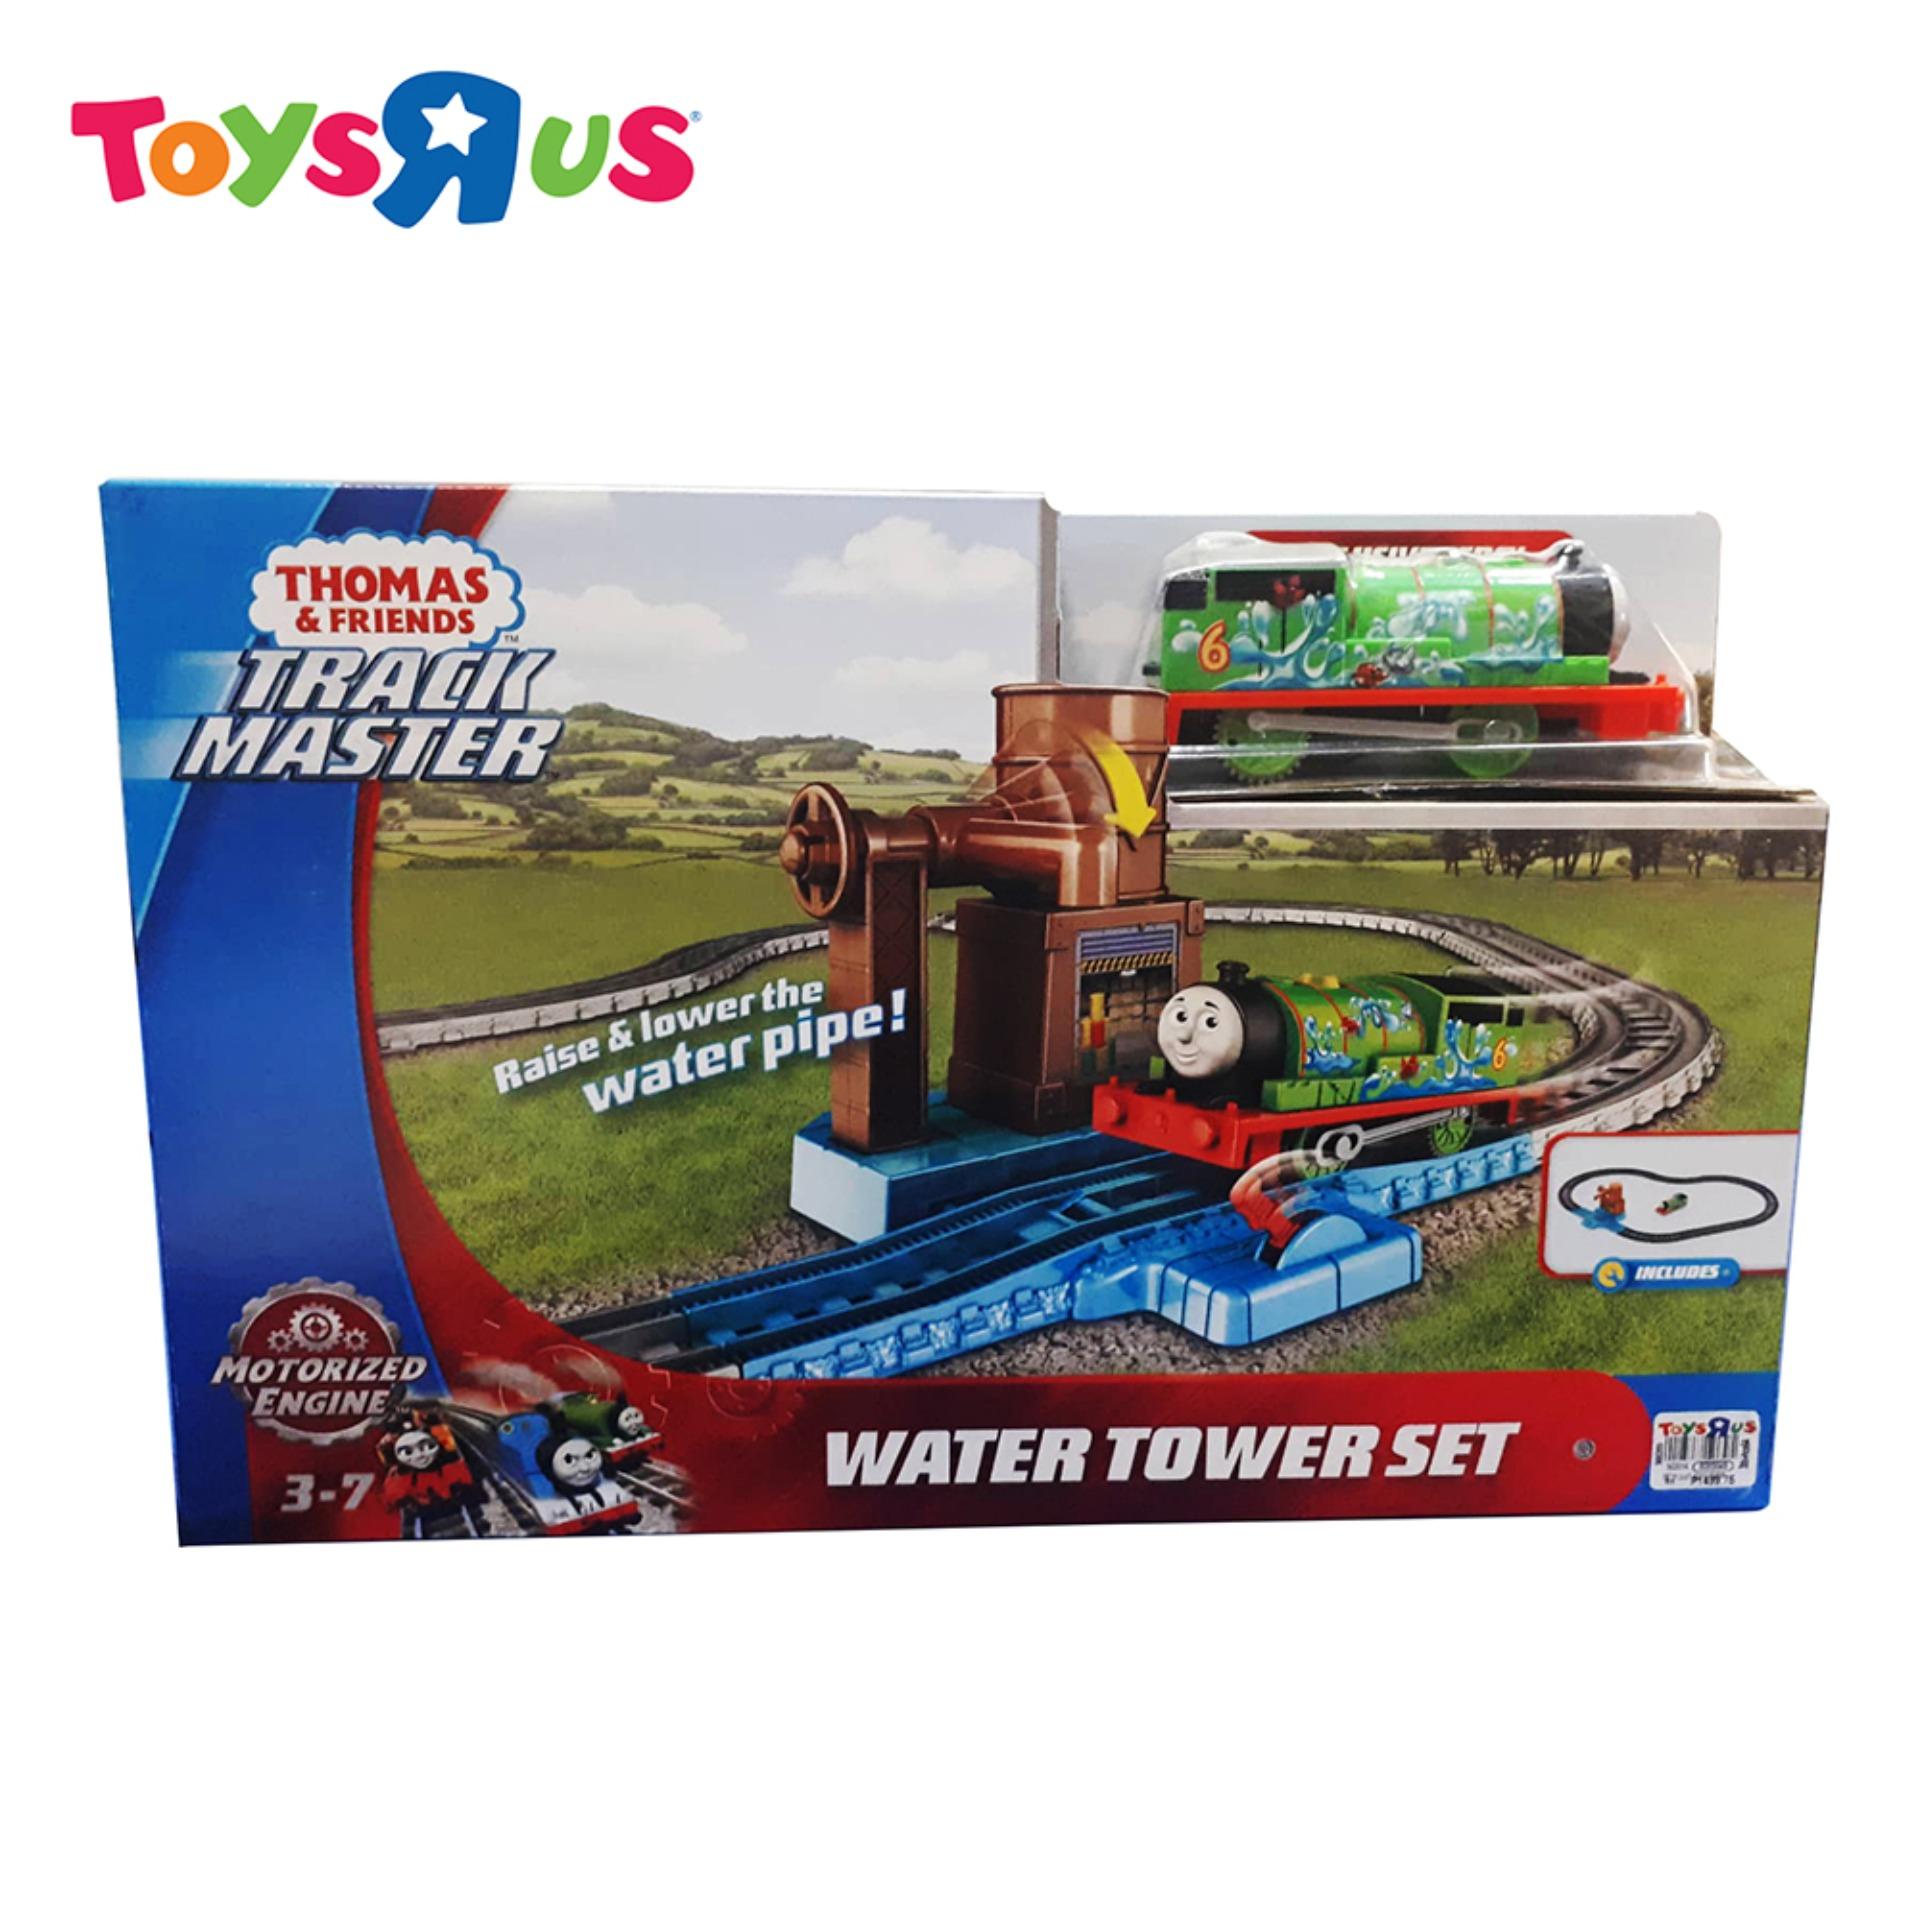 Thomas & Friends Track Master Water Tower Set | Toys R Us